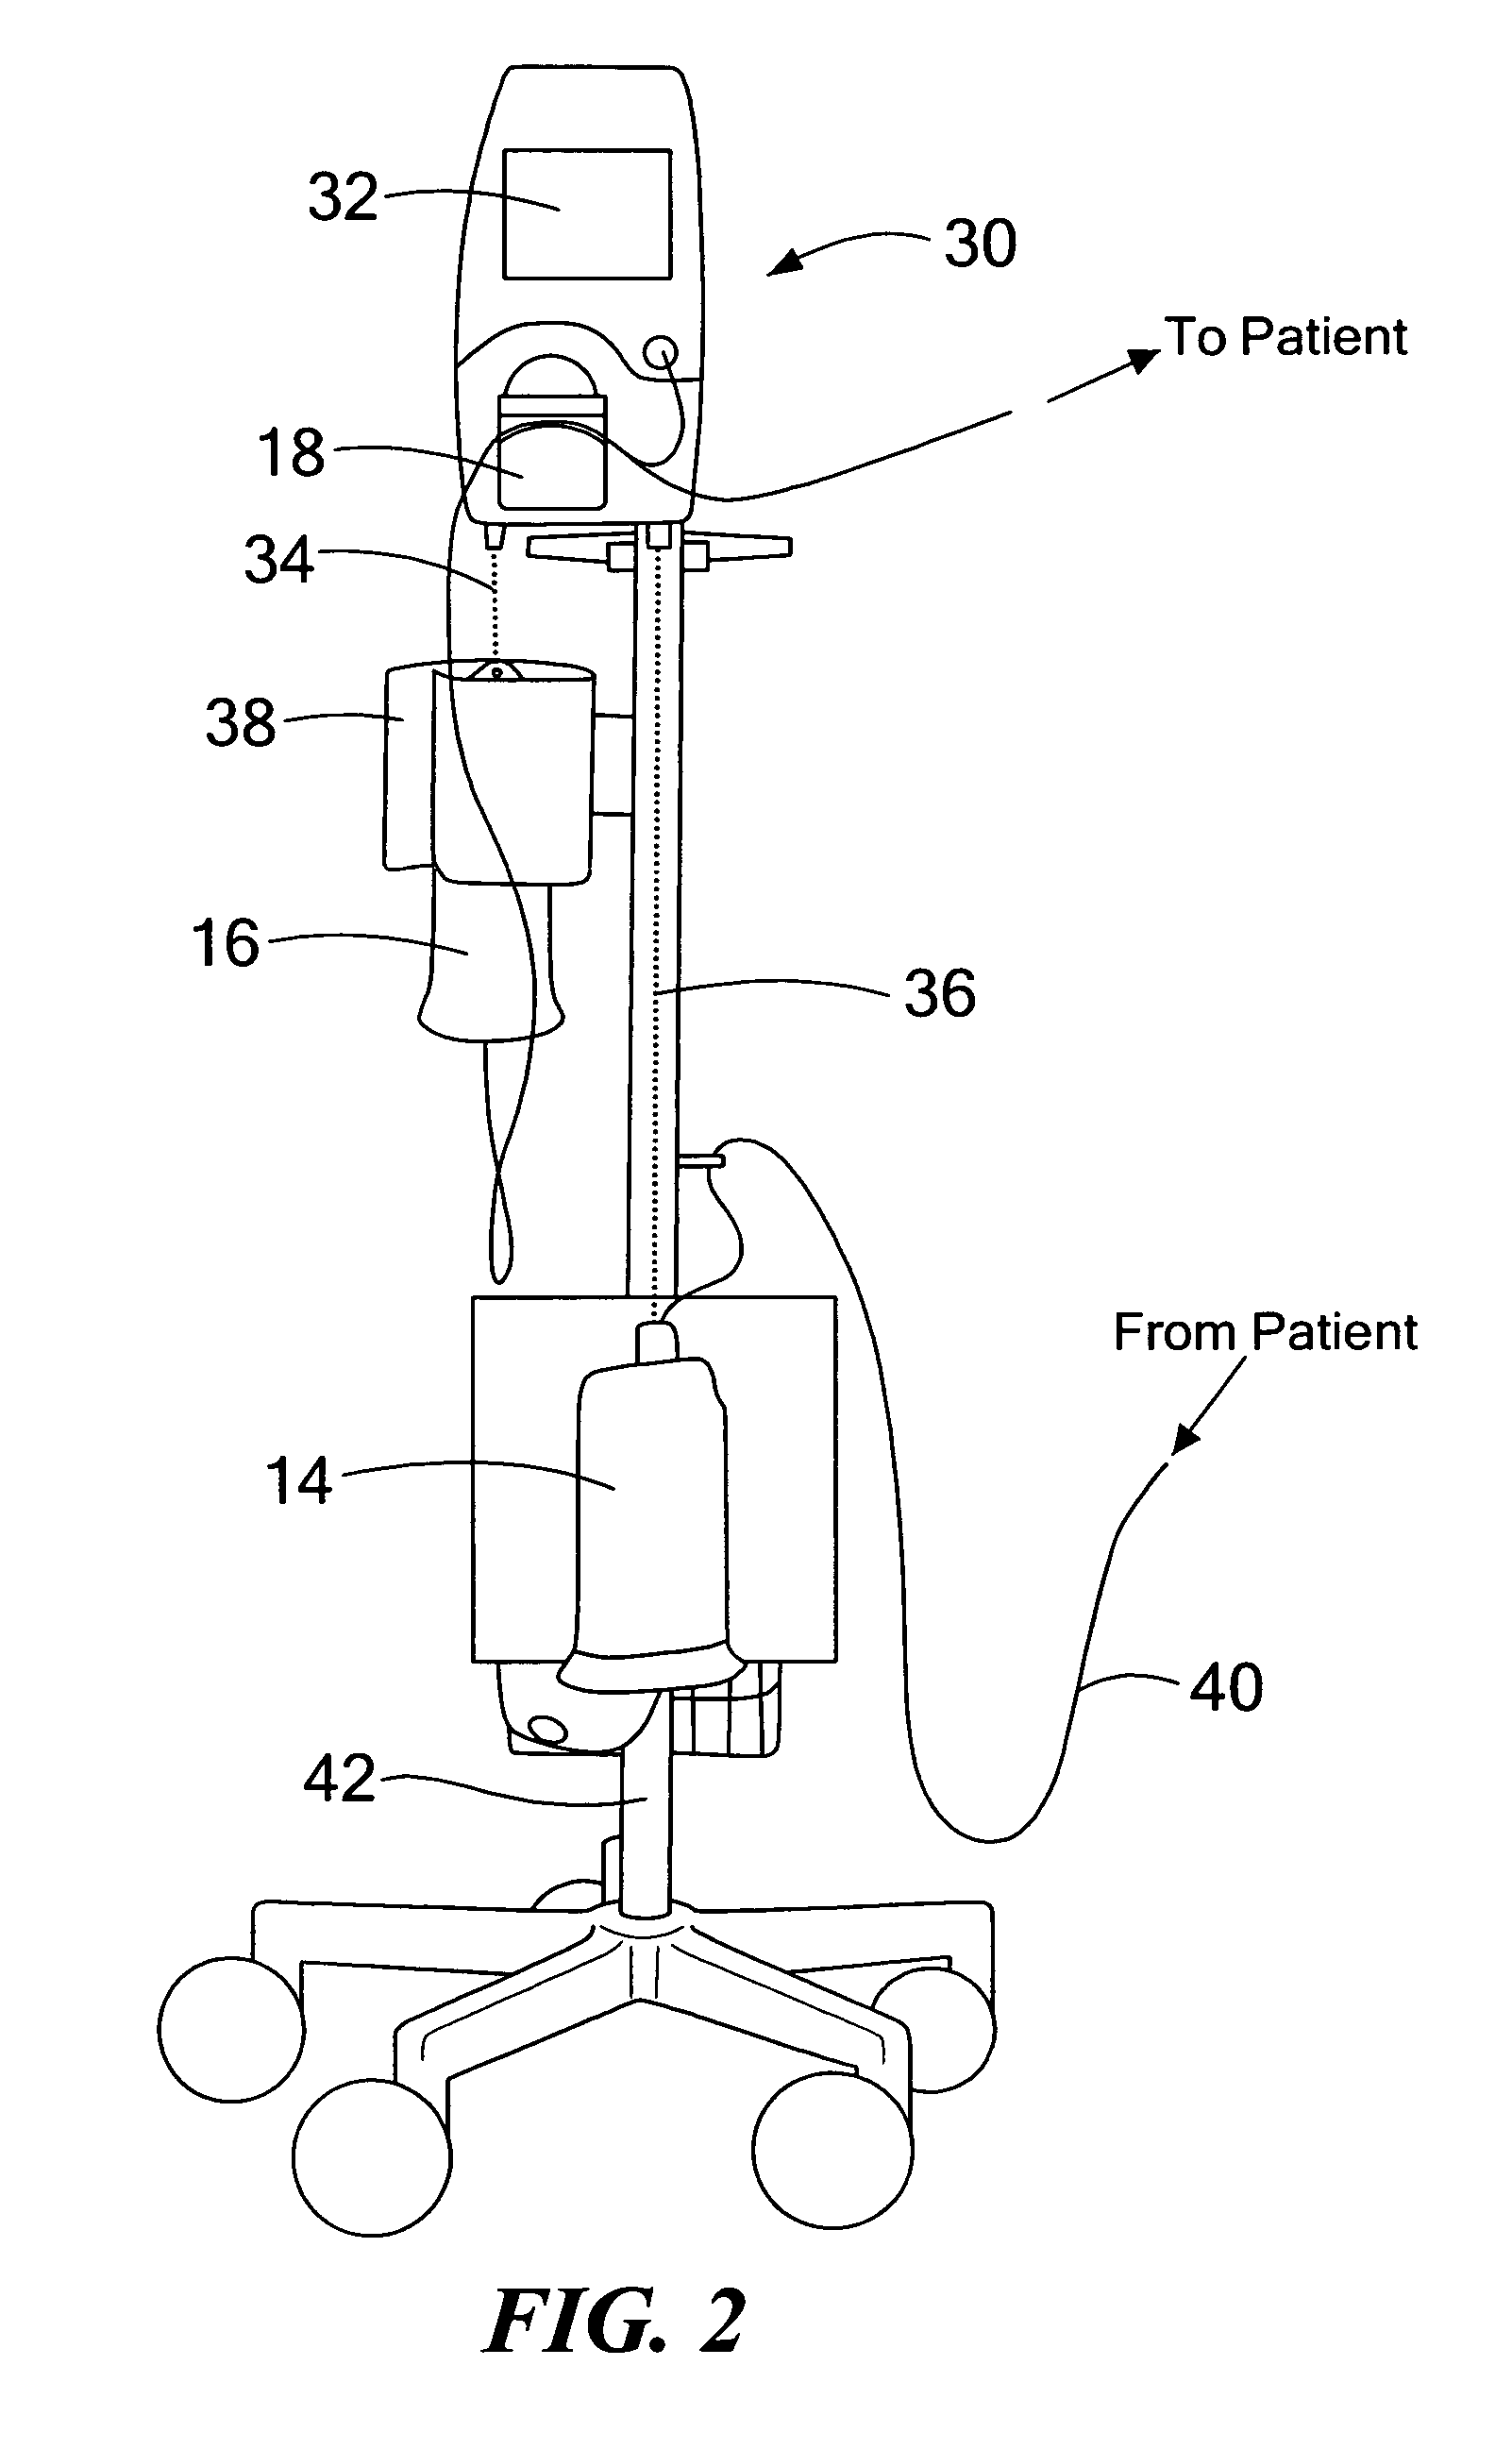 Fluid replacement device